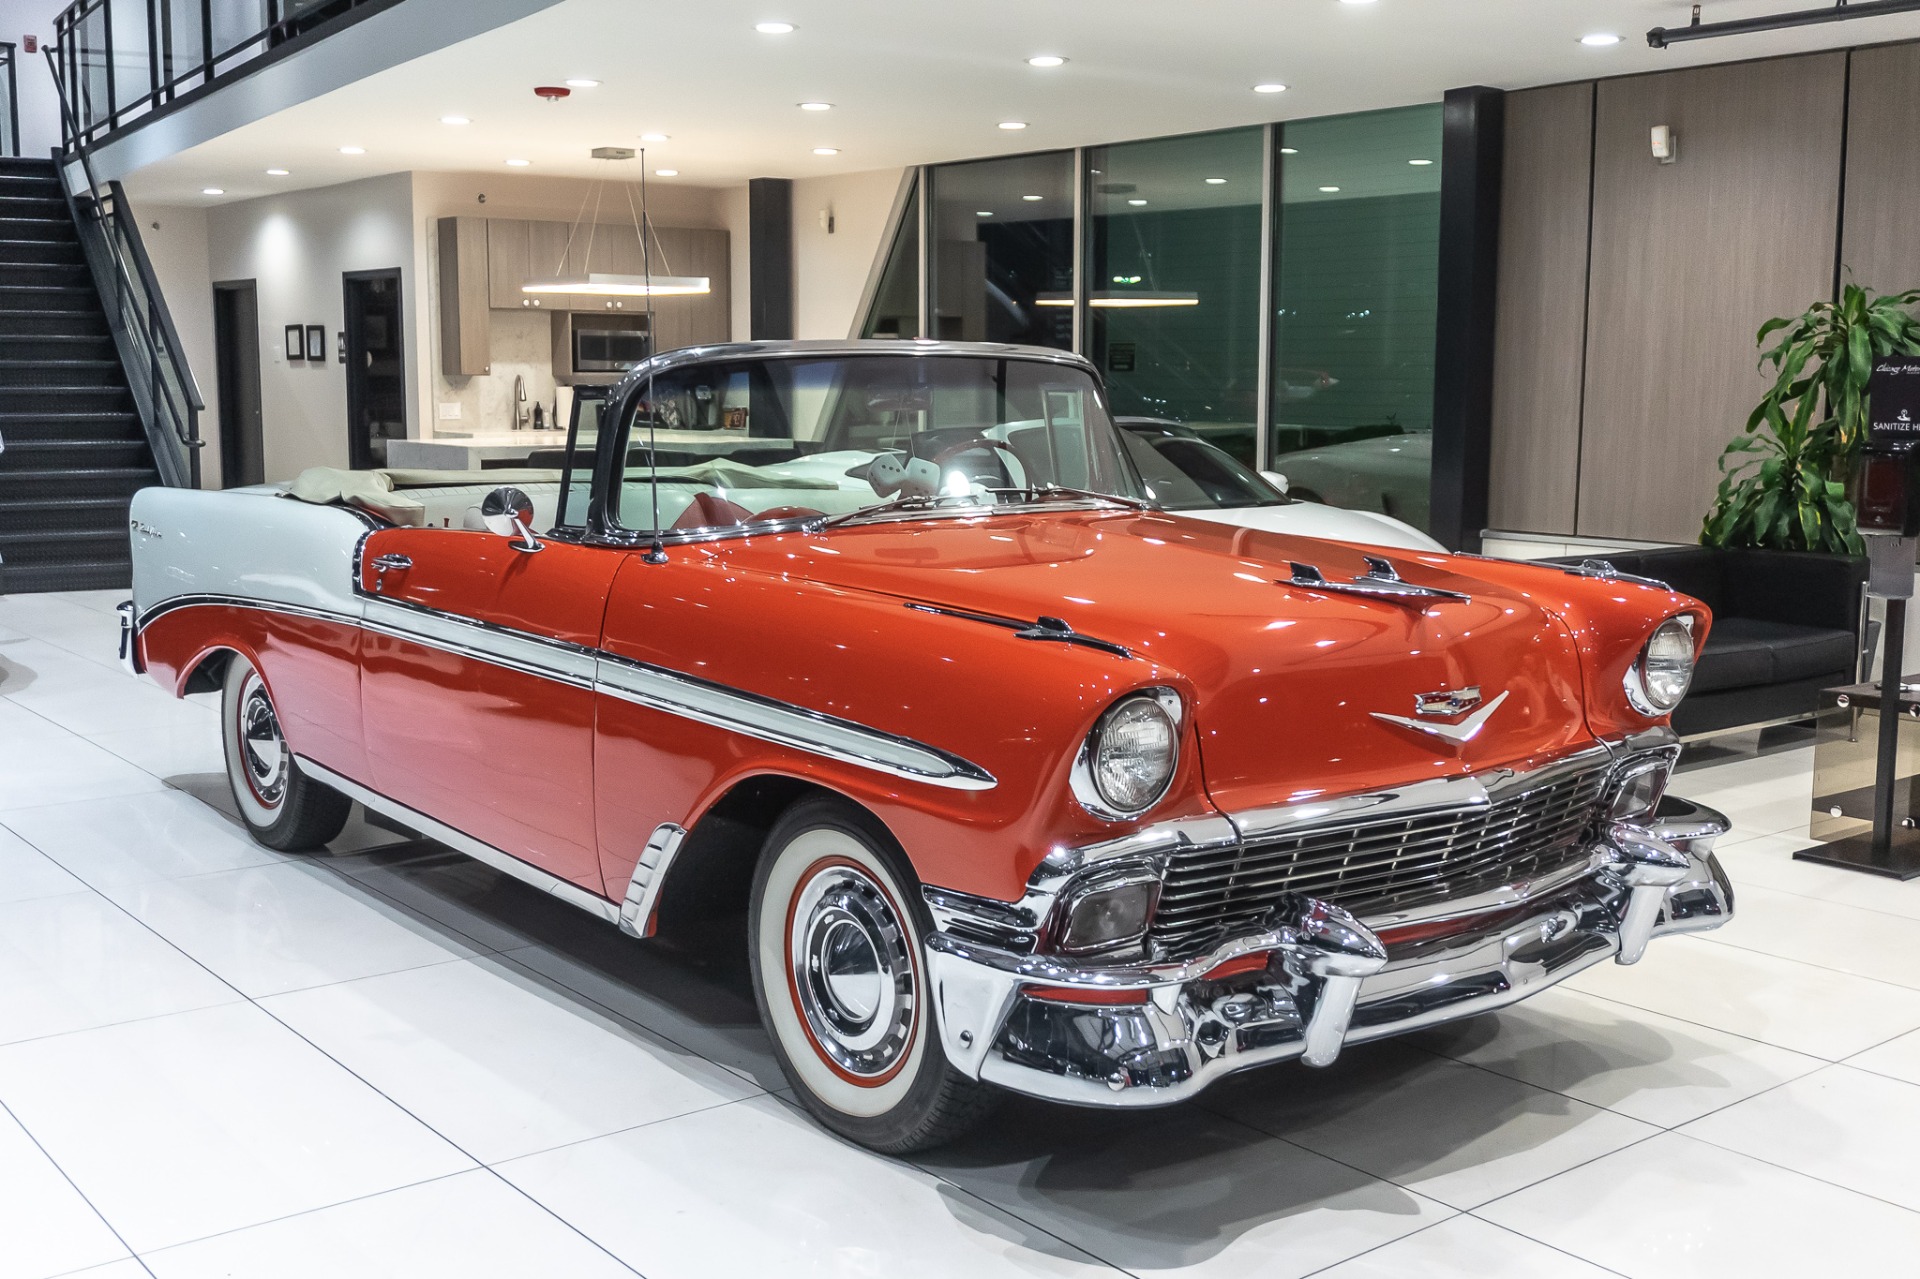 Used-1956-Chevrolet-BelAir-Convertible-Ground-Up-Restoration-265-V8-POWER-TOP